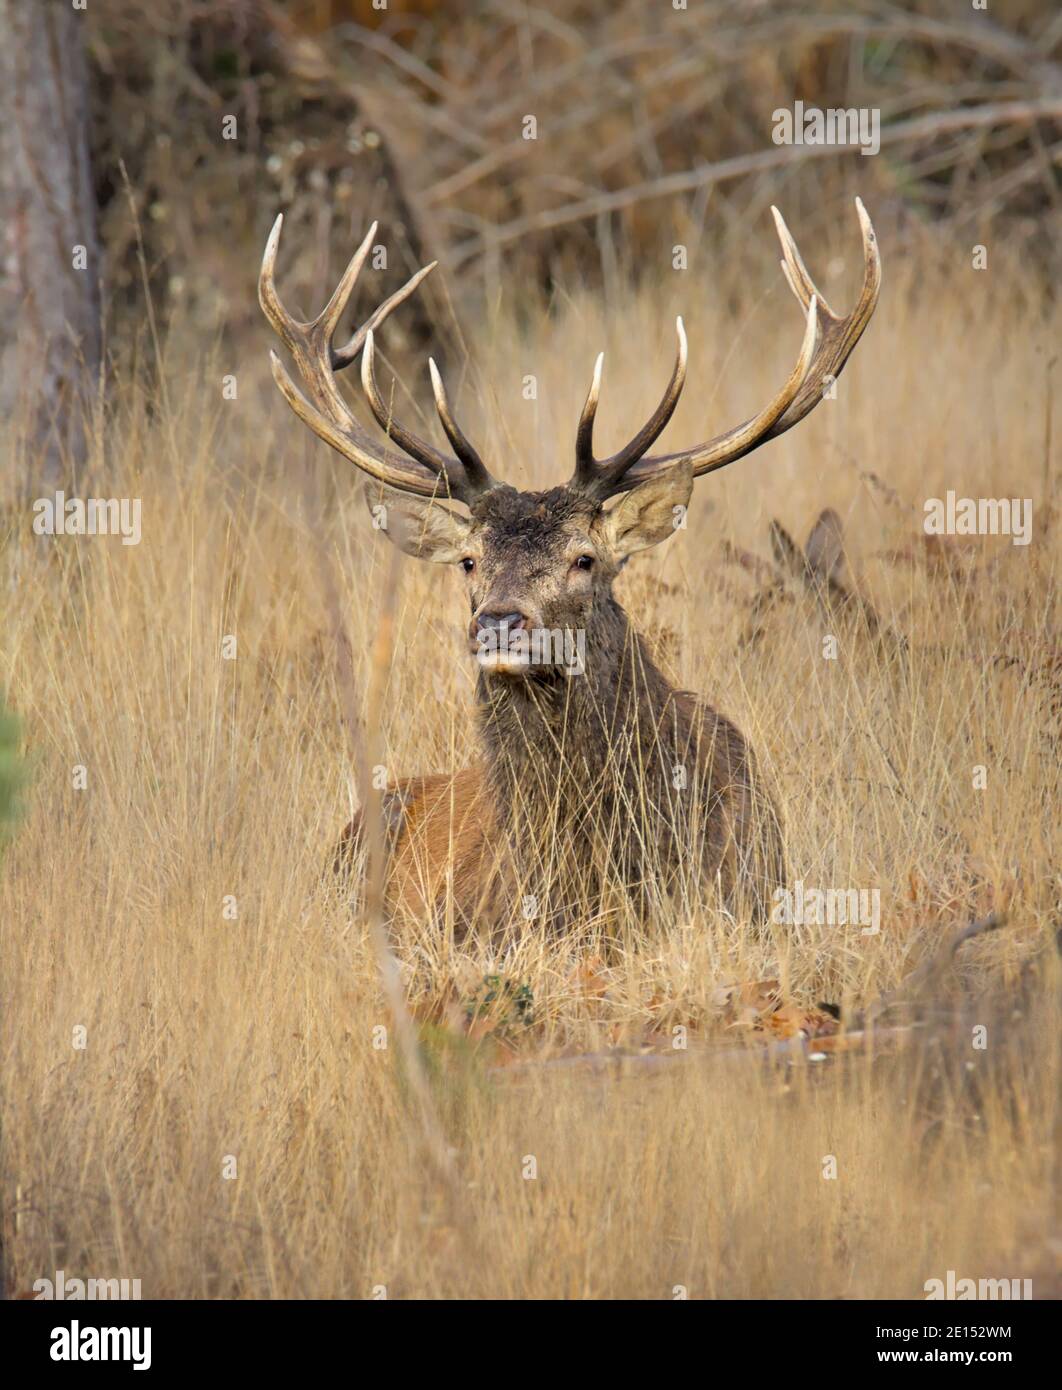 Old Male Red Deer Stag, Cervus elaphus, With Antlers Sitting Amongst Dead Grass Looking At The Camera. Taken New Forest UK Stock Photo